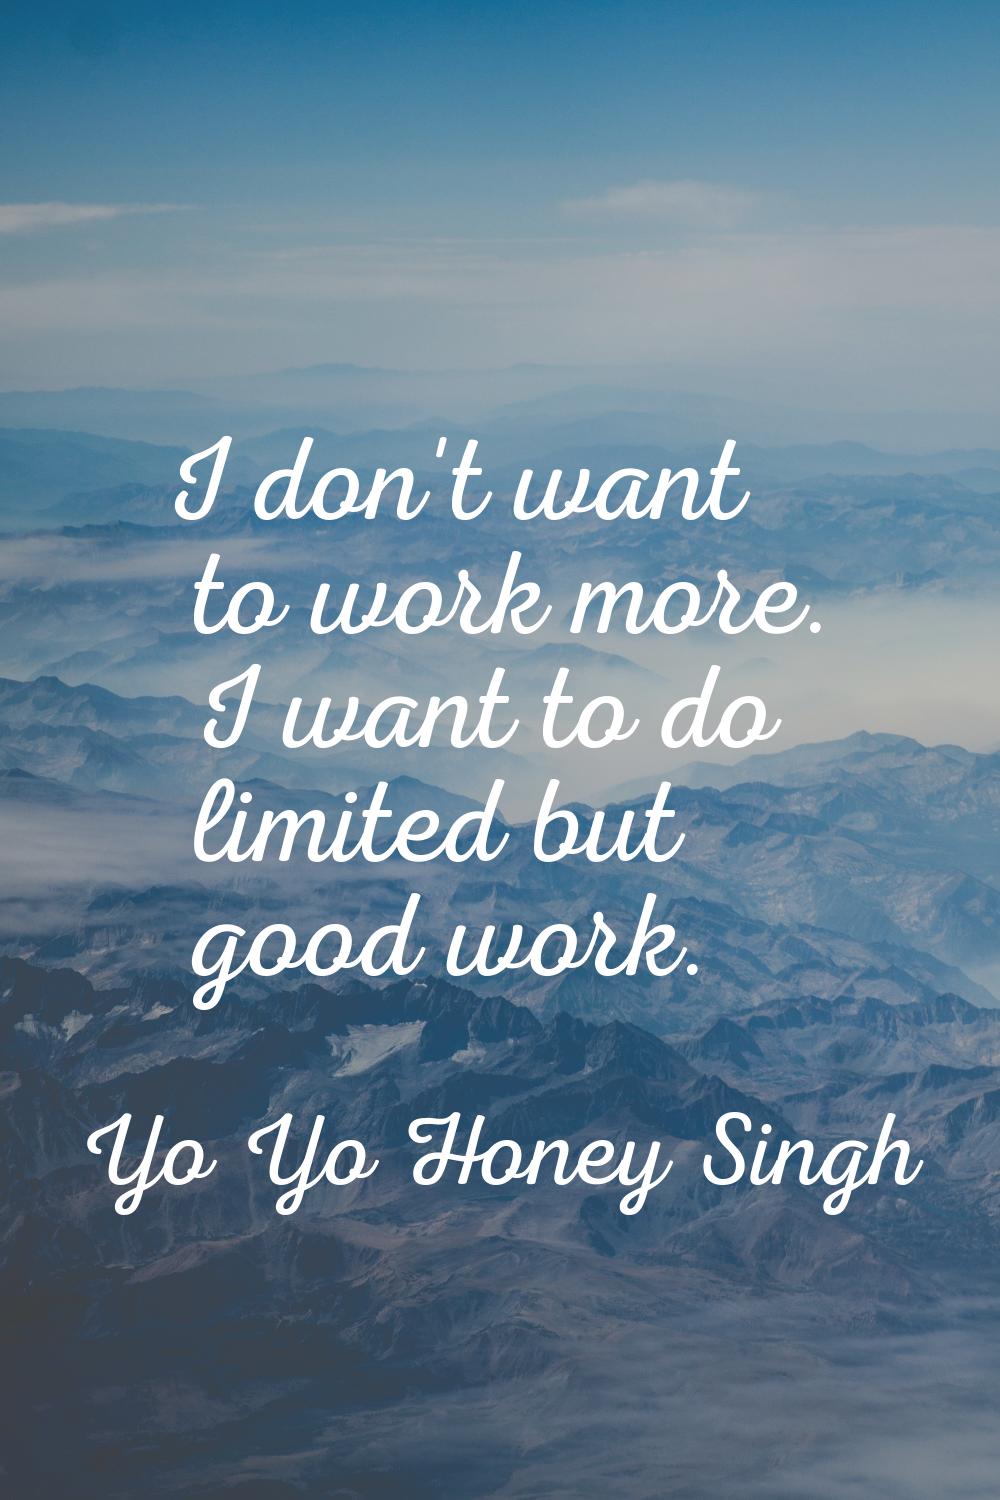 I don't want to work more. I want to do limited but good work.